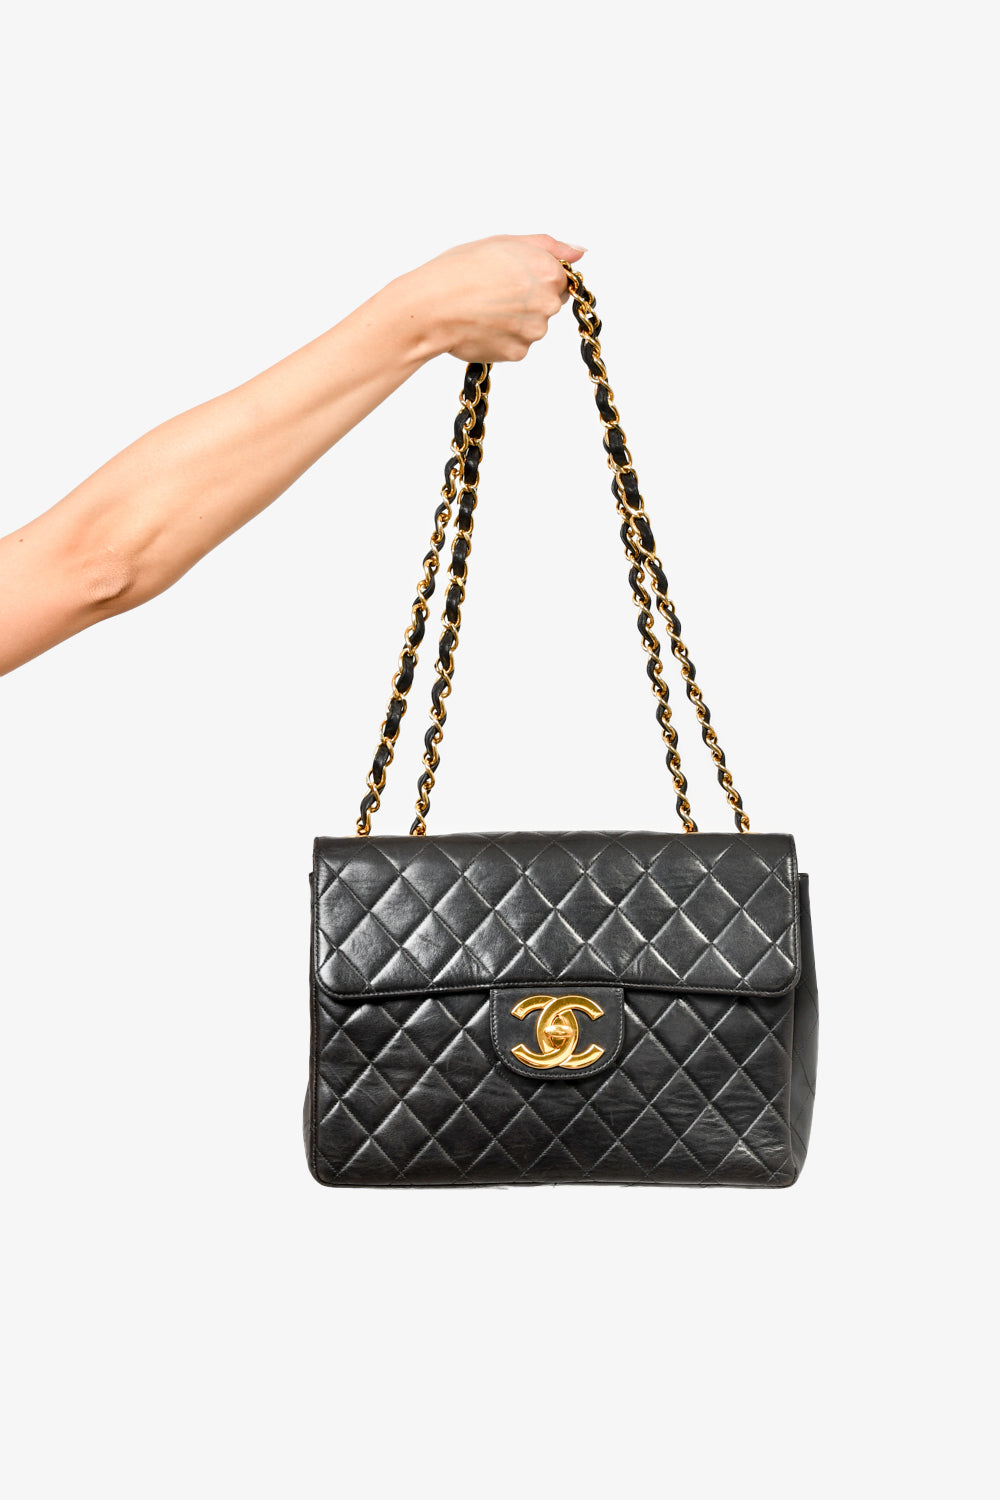 Chanel Vintage Black Quilted Lambskin Medium Tall Flap Gold